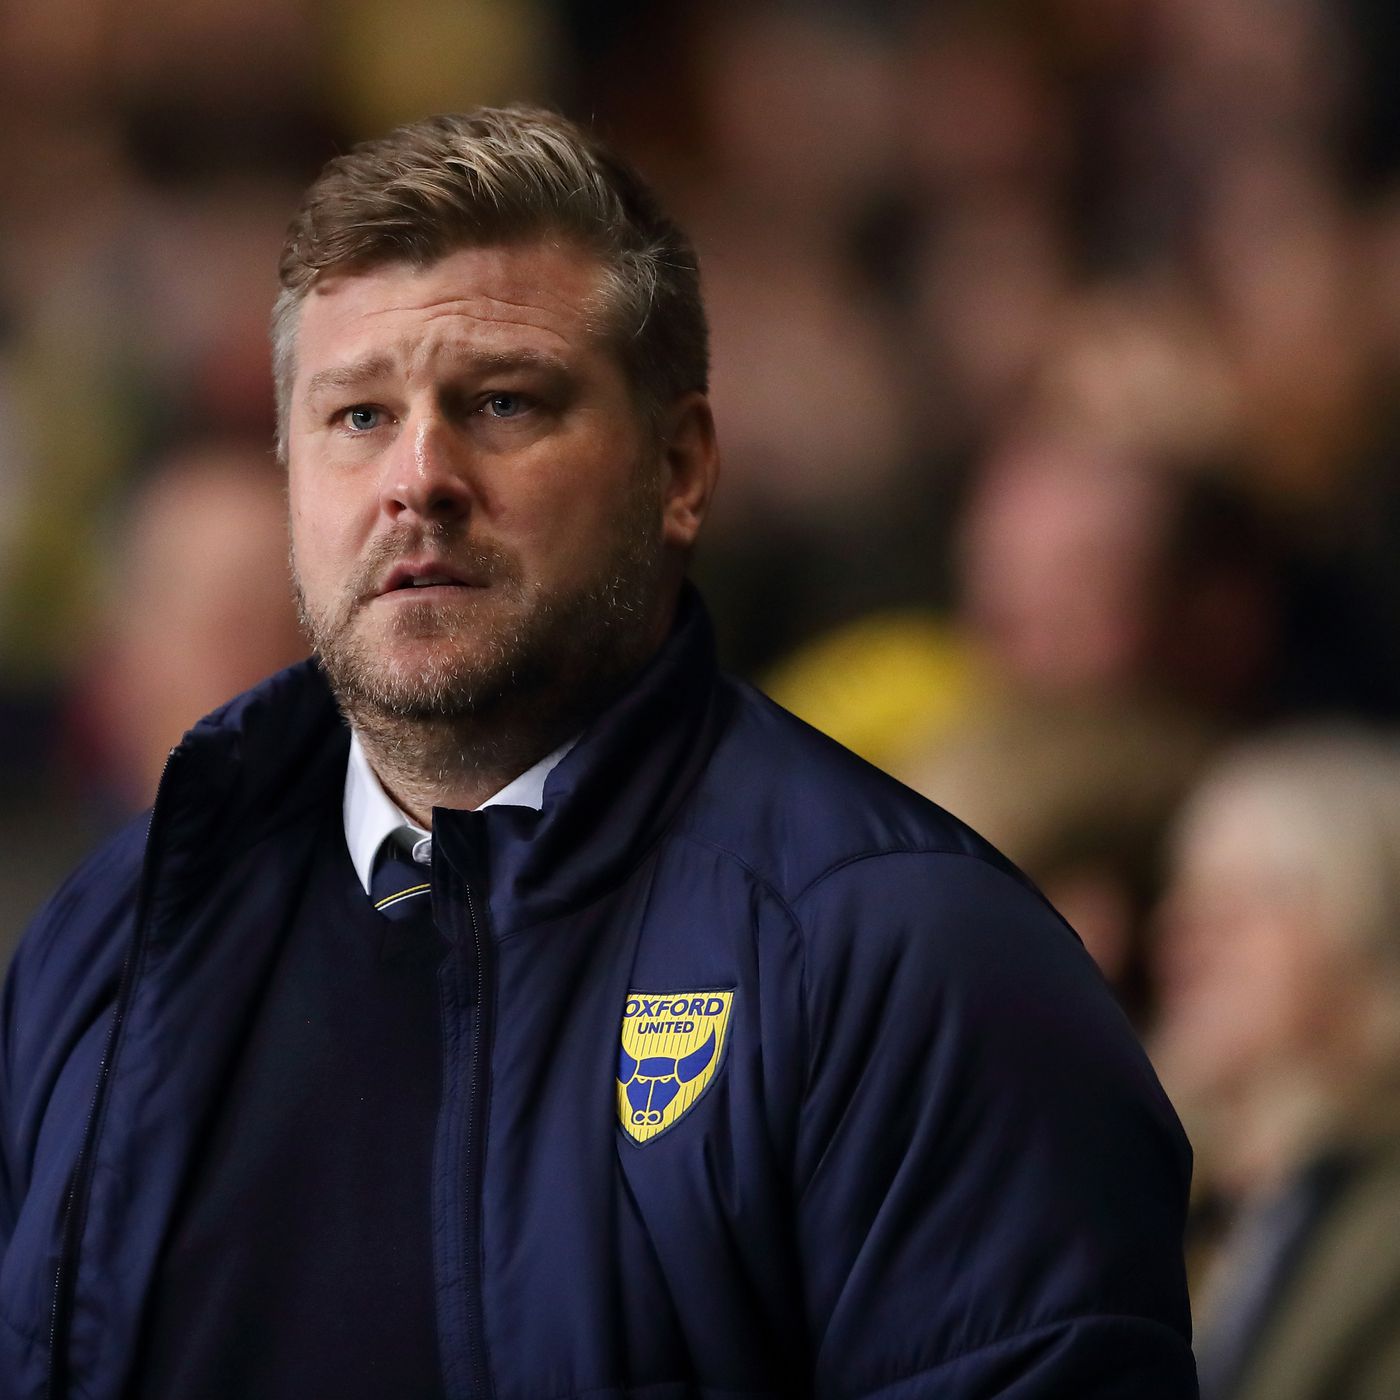 Fan Focus: Oxford fan George says manager Karl Robinson is doing a  “fantastic job” at his club! - Roker Report